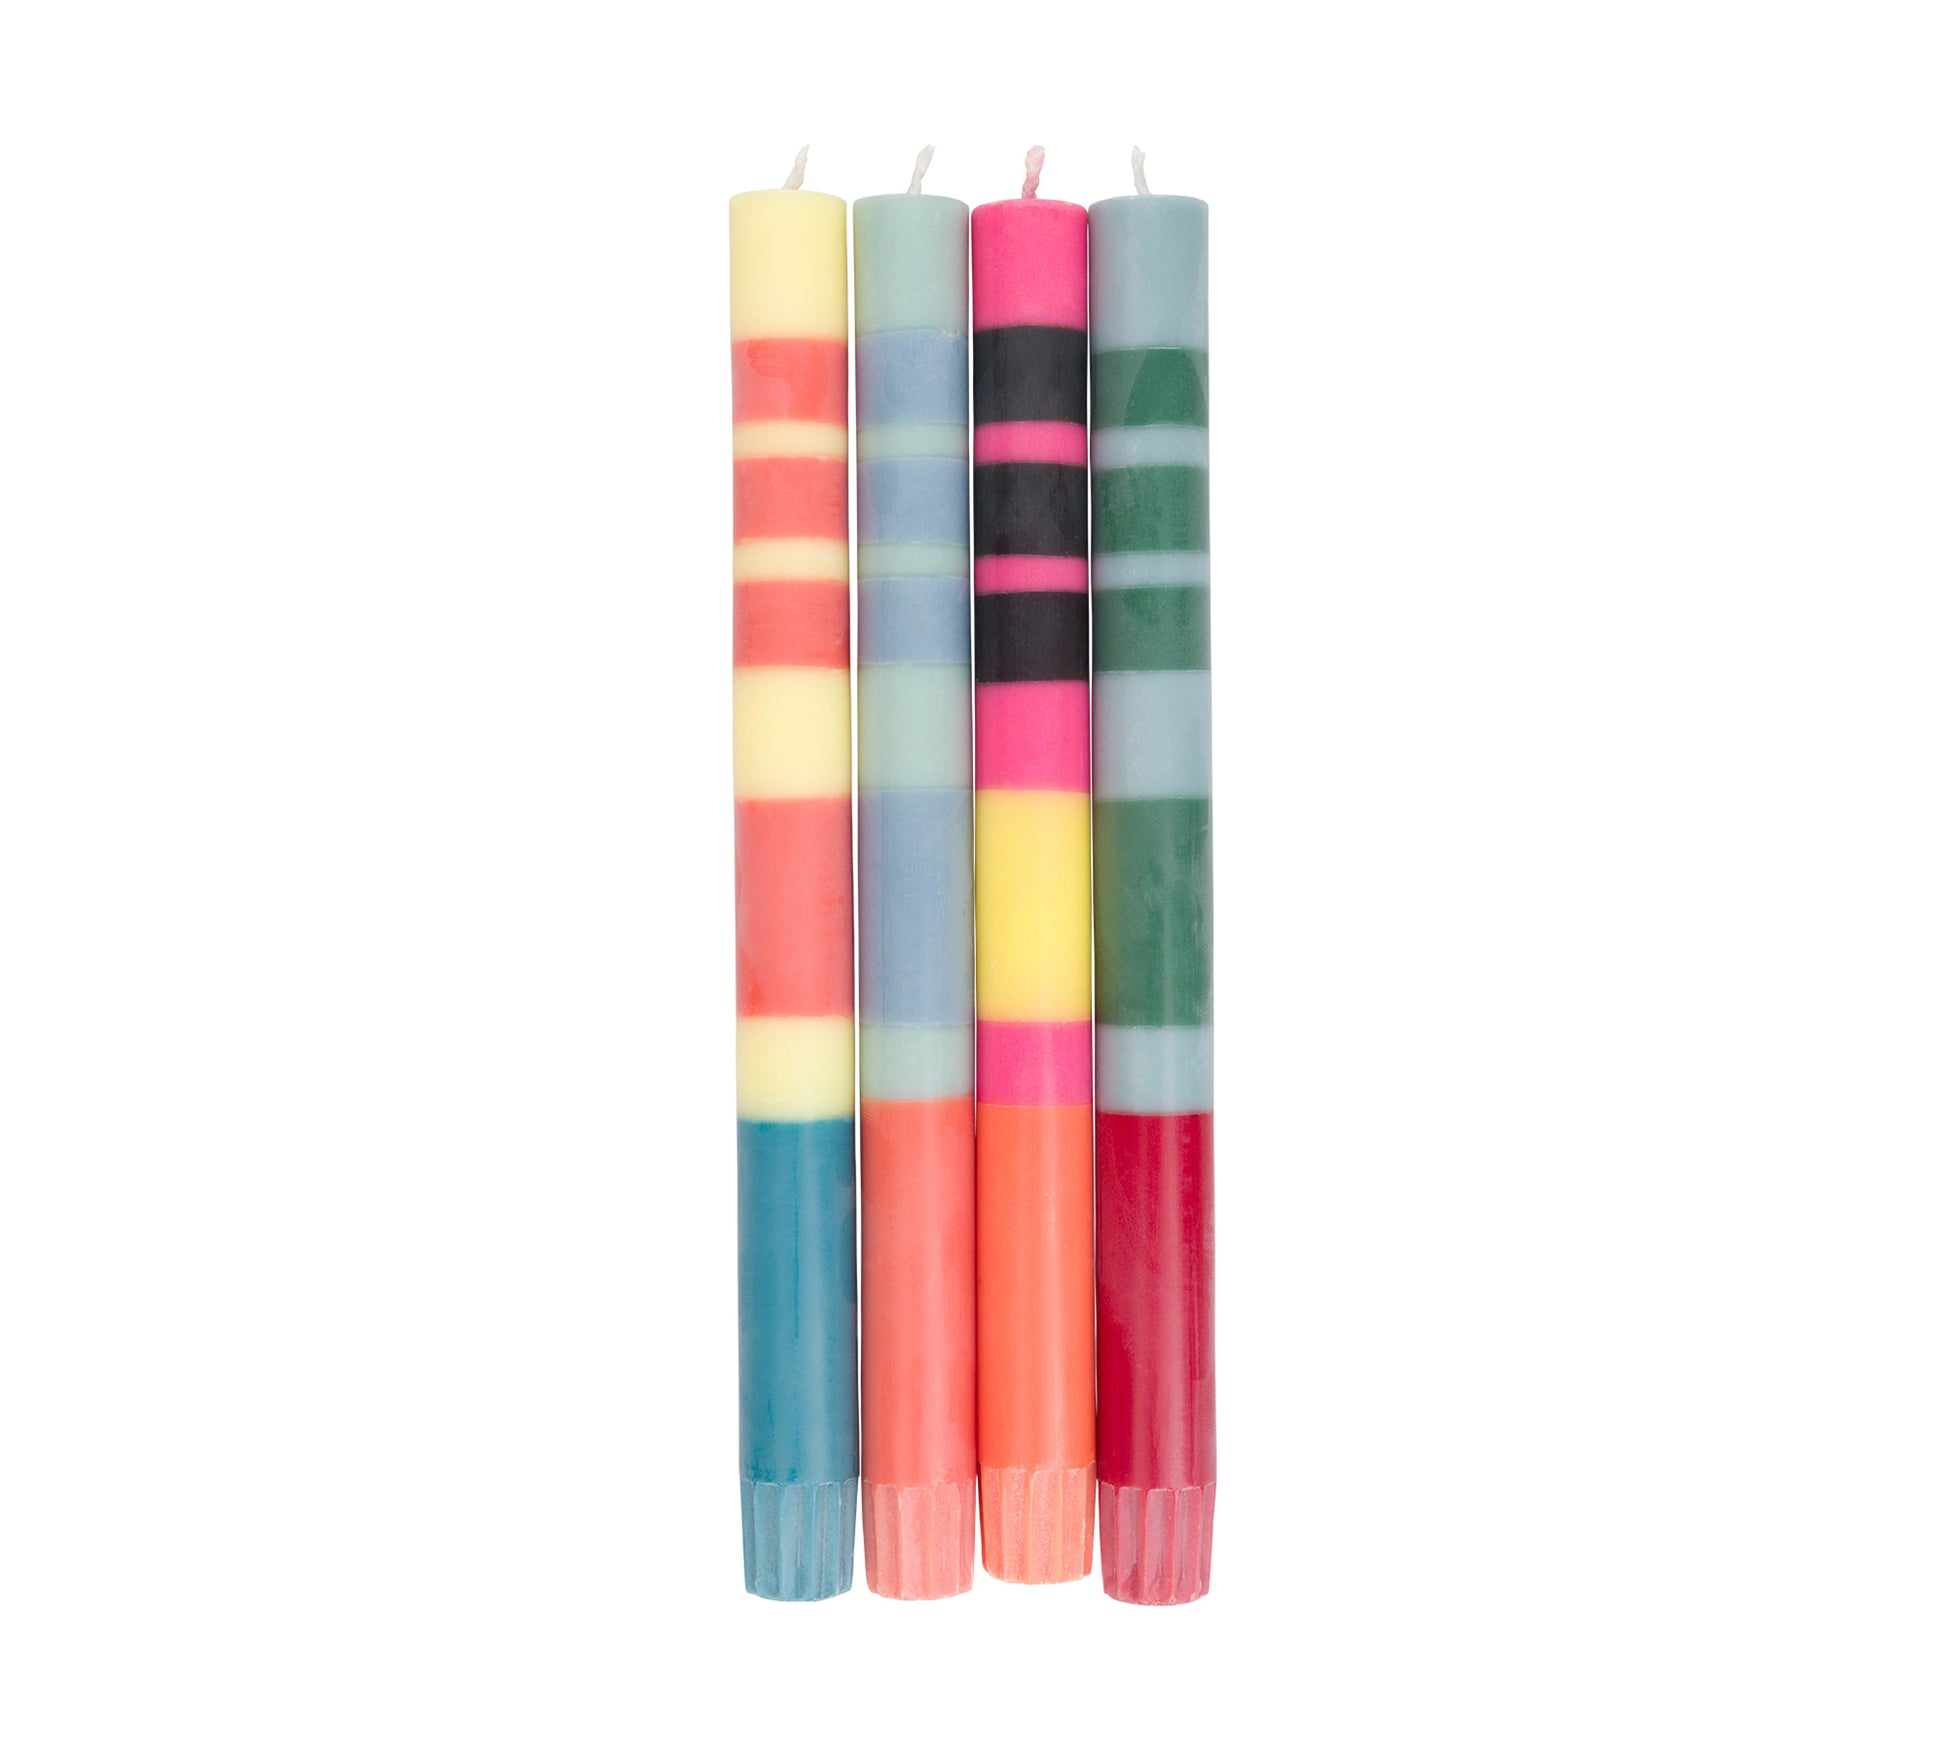 Twiggy mixed colour candles by British Colour Standard